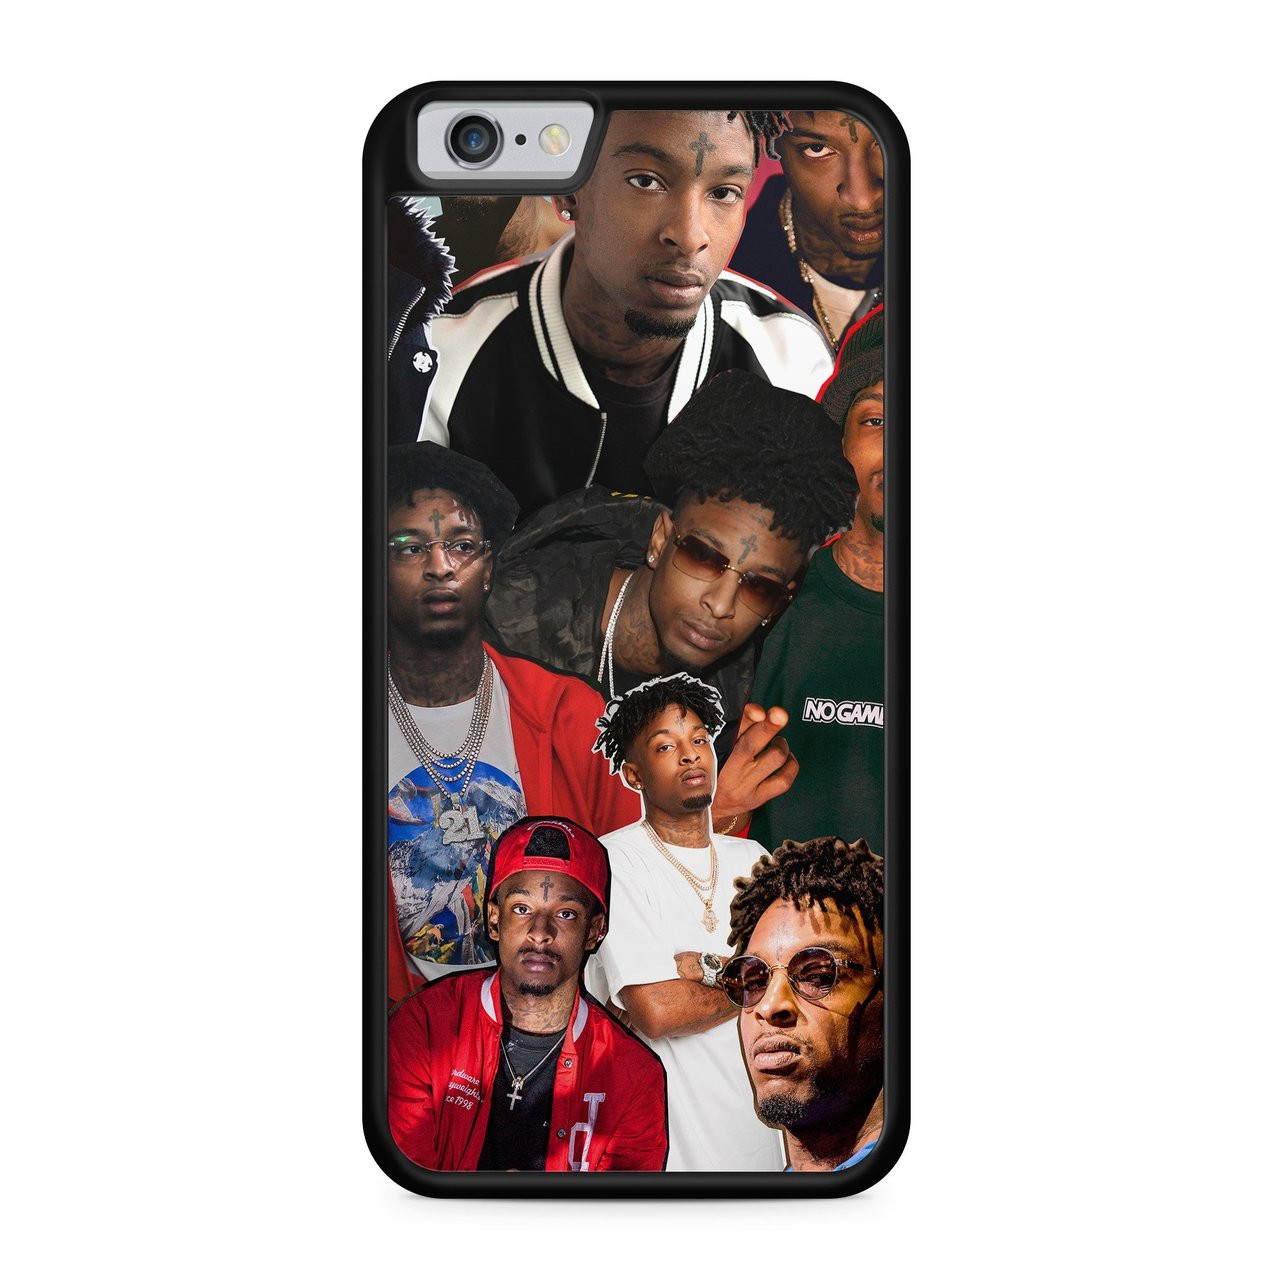 Wall Account 6 Account 4000013864668 Costuom Inspired by 21 savage Phone Case Compatible With Iphone 7 XR 6s Plus 6 X 8 9 Cases XS Max Clear Iphones Cases TPU 